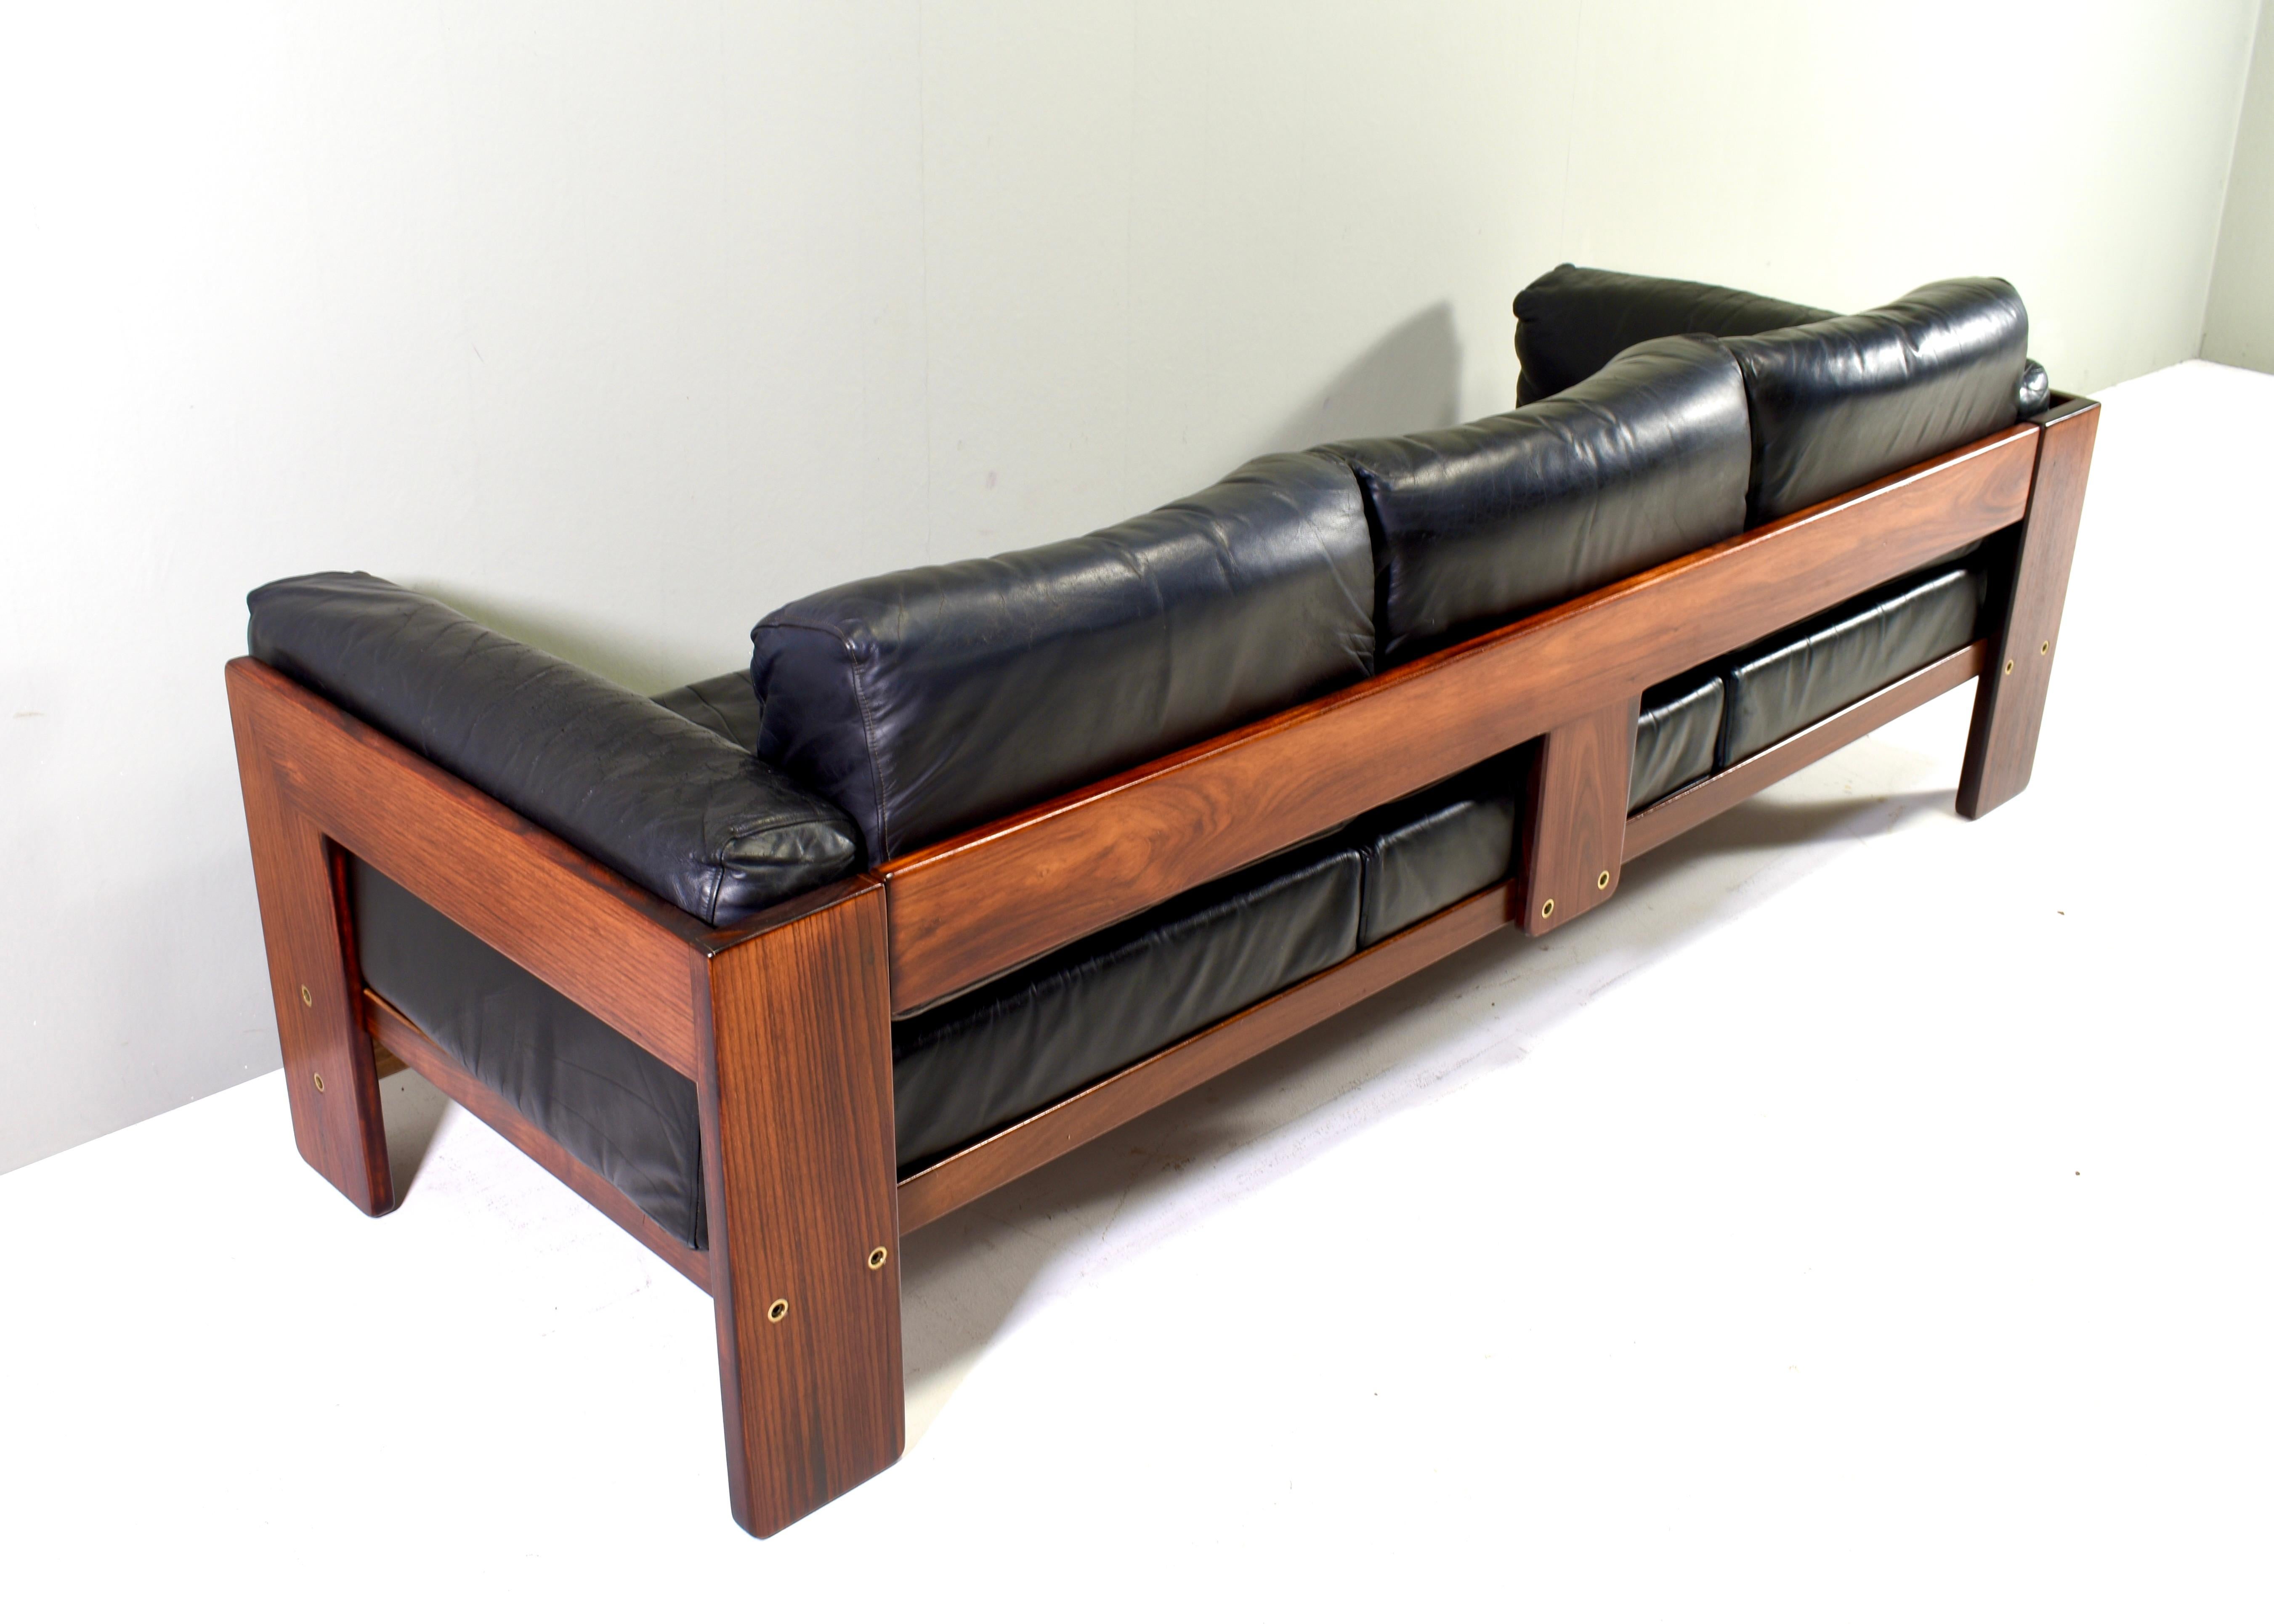 Leather BASTIANO Sofa in black leather by Afra and Tobia Scarpa for KNOLL – Italy, 1962 For Sale